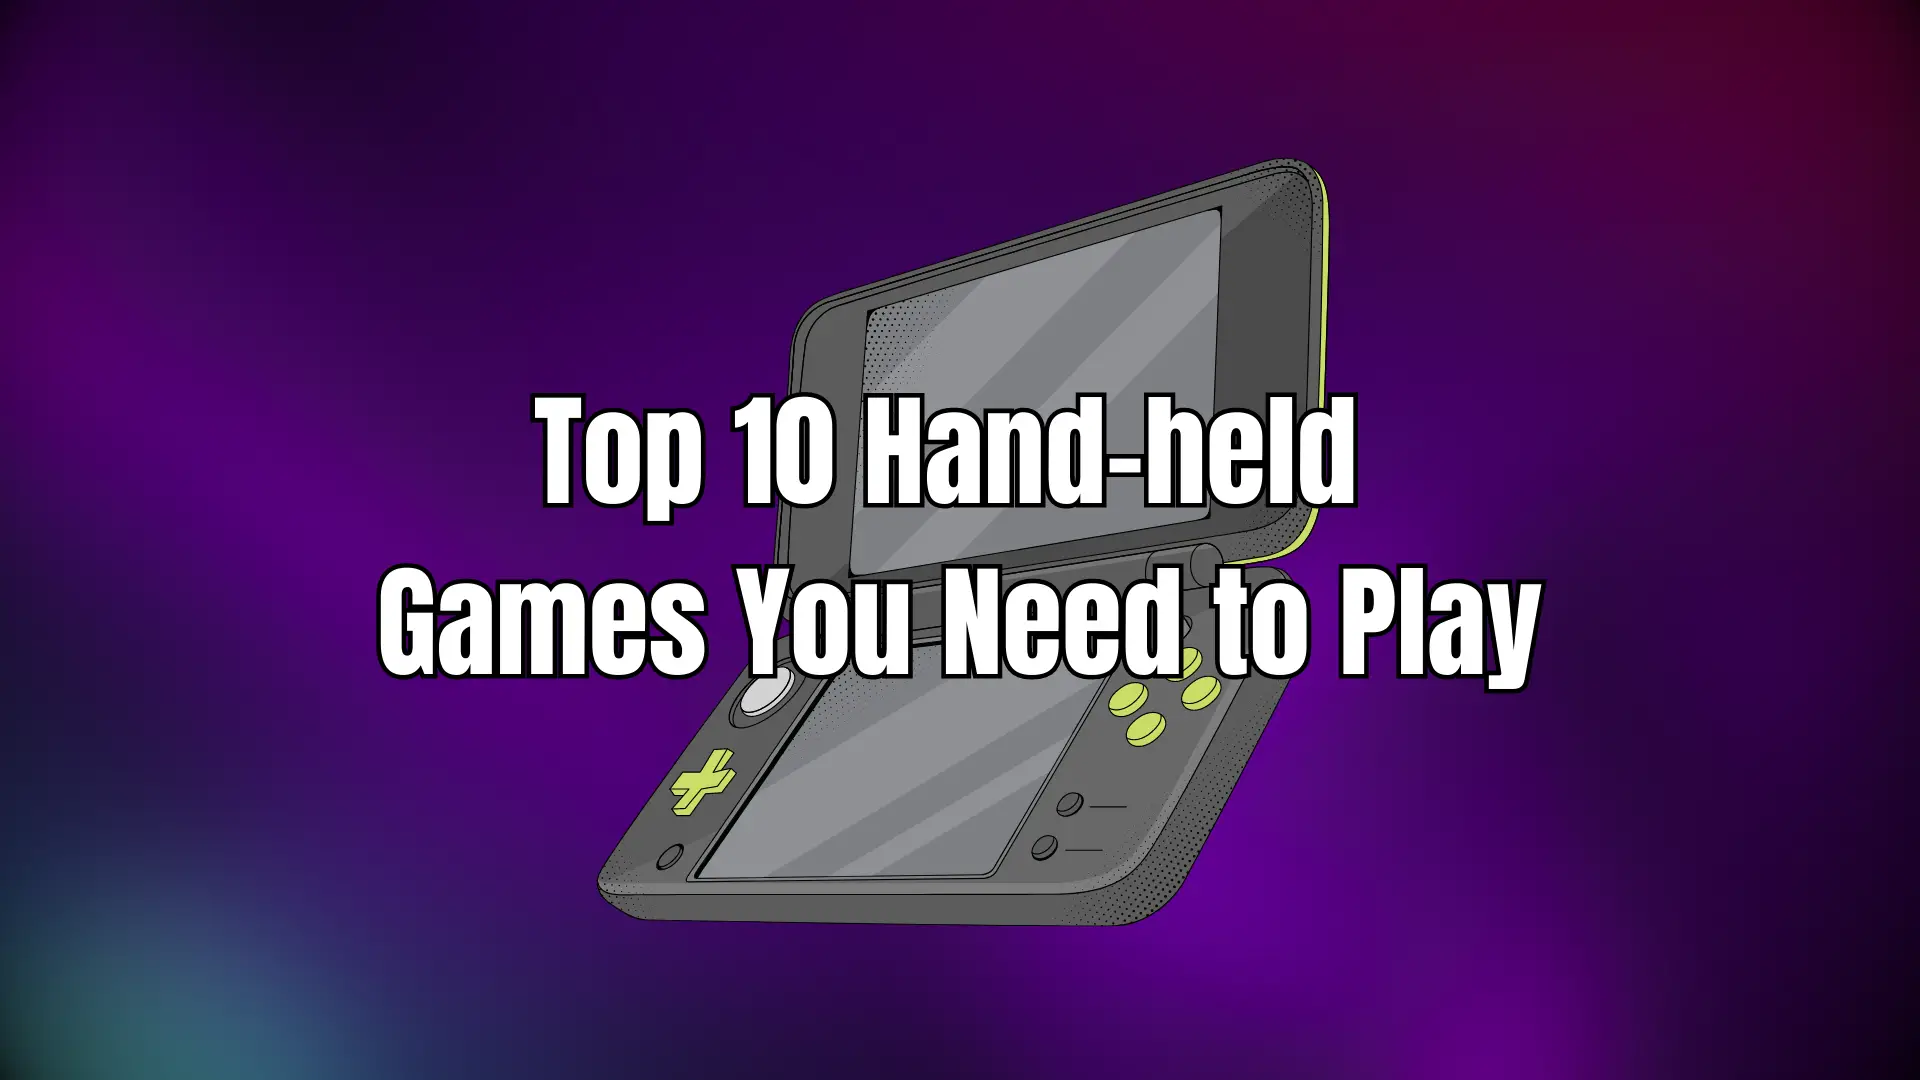 Top 10 Hand-held Games You Need to Play